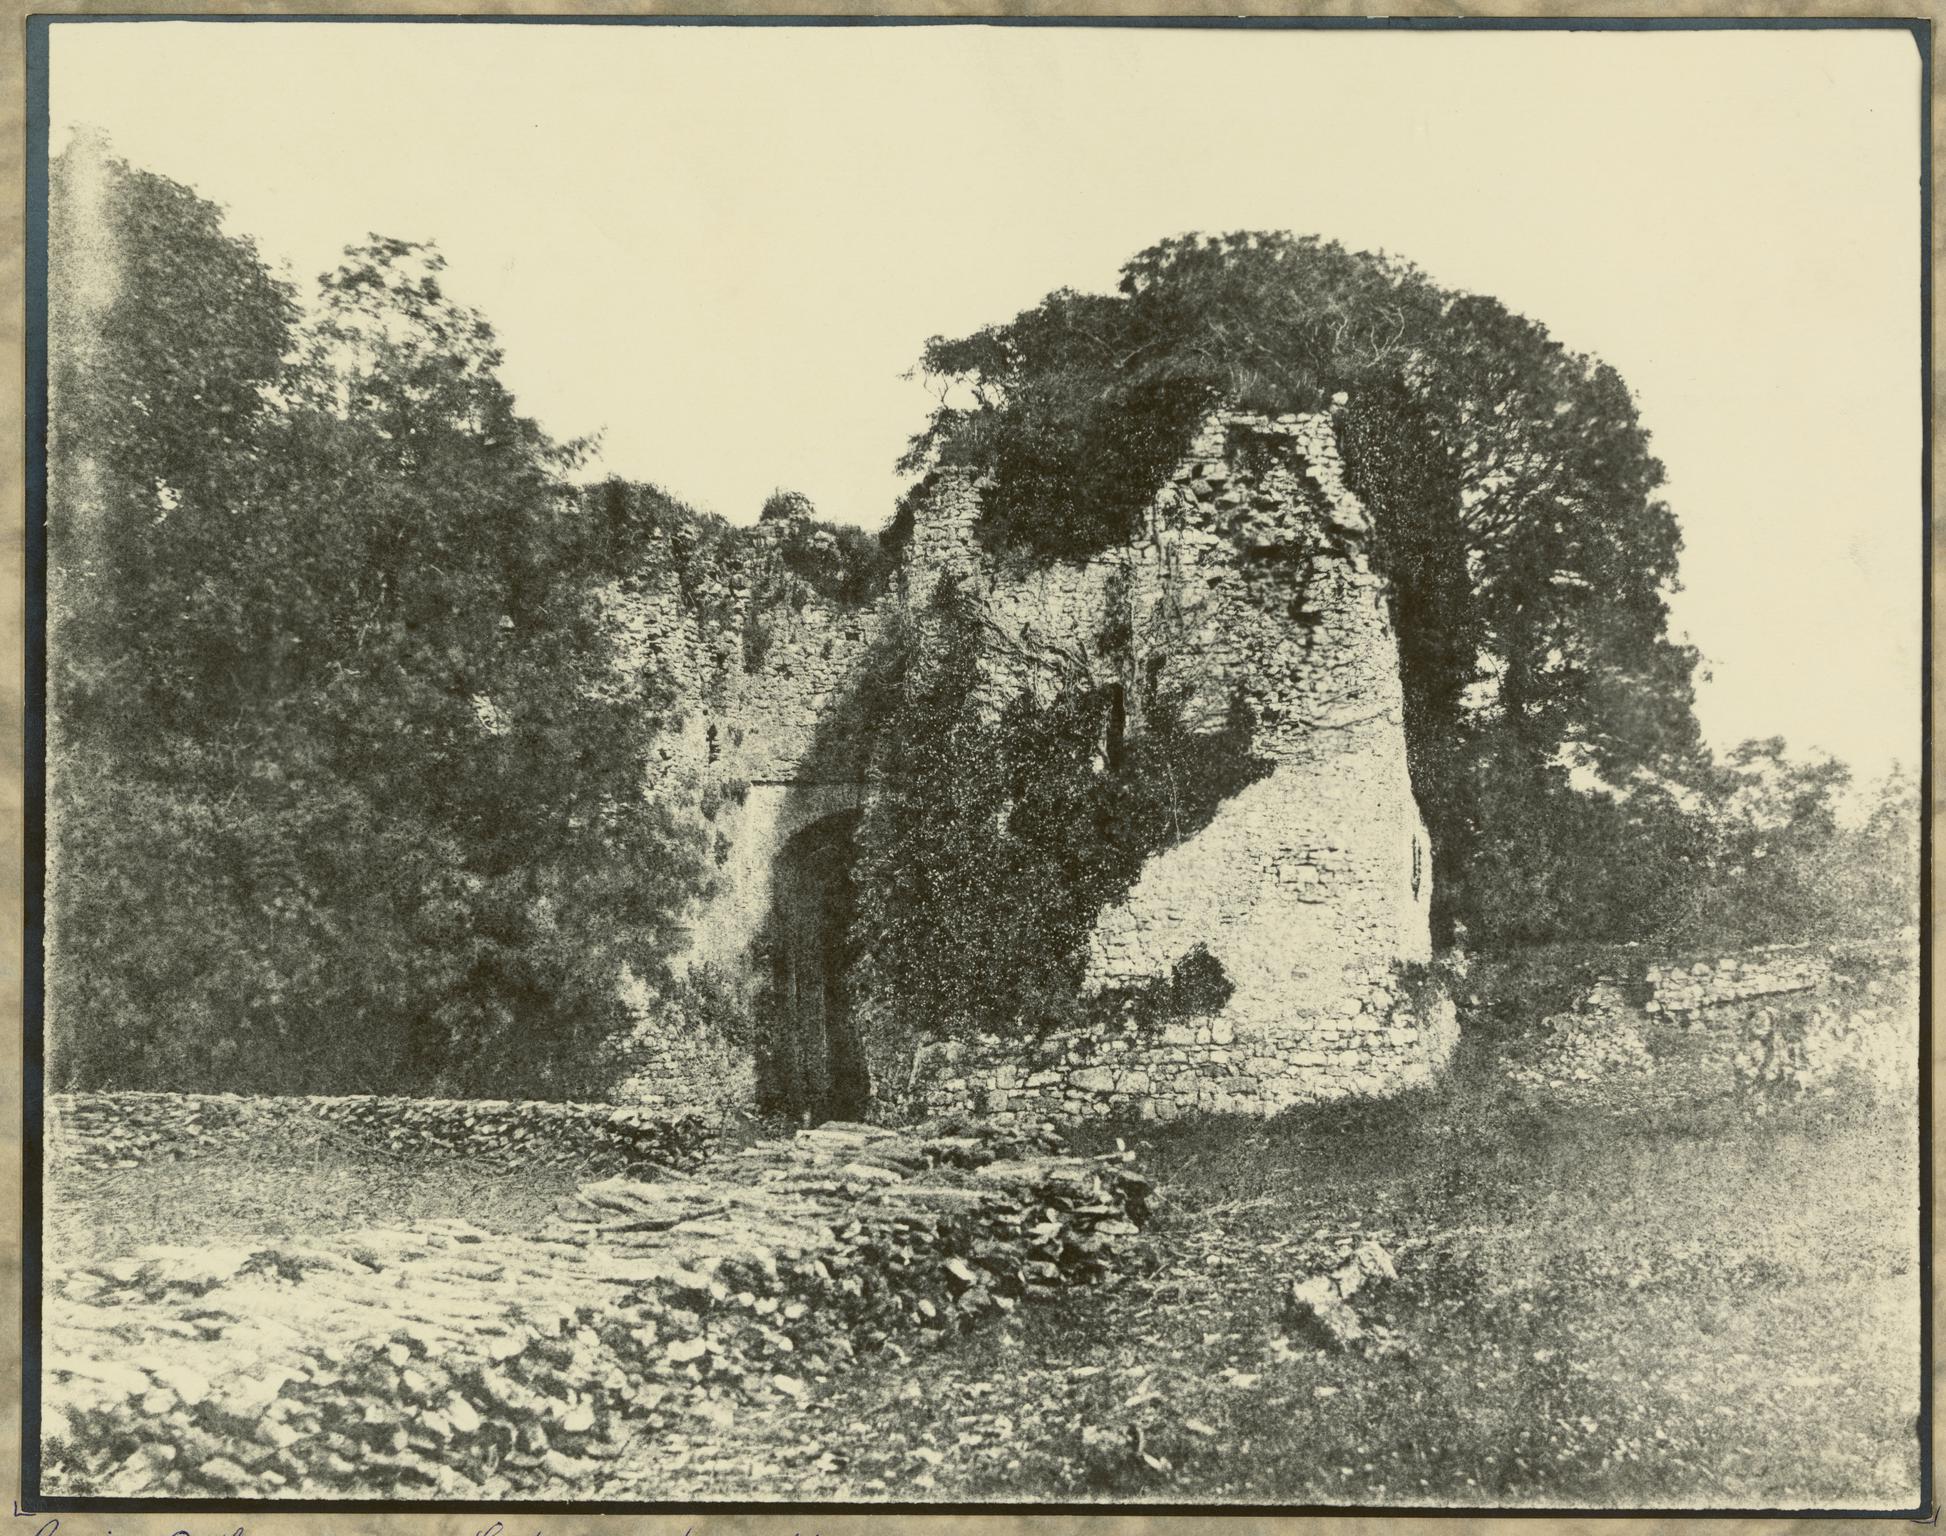 Penrice Catle - Entrance from N. - Ruins